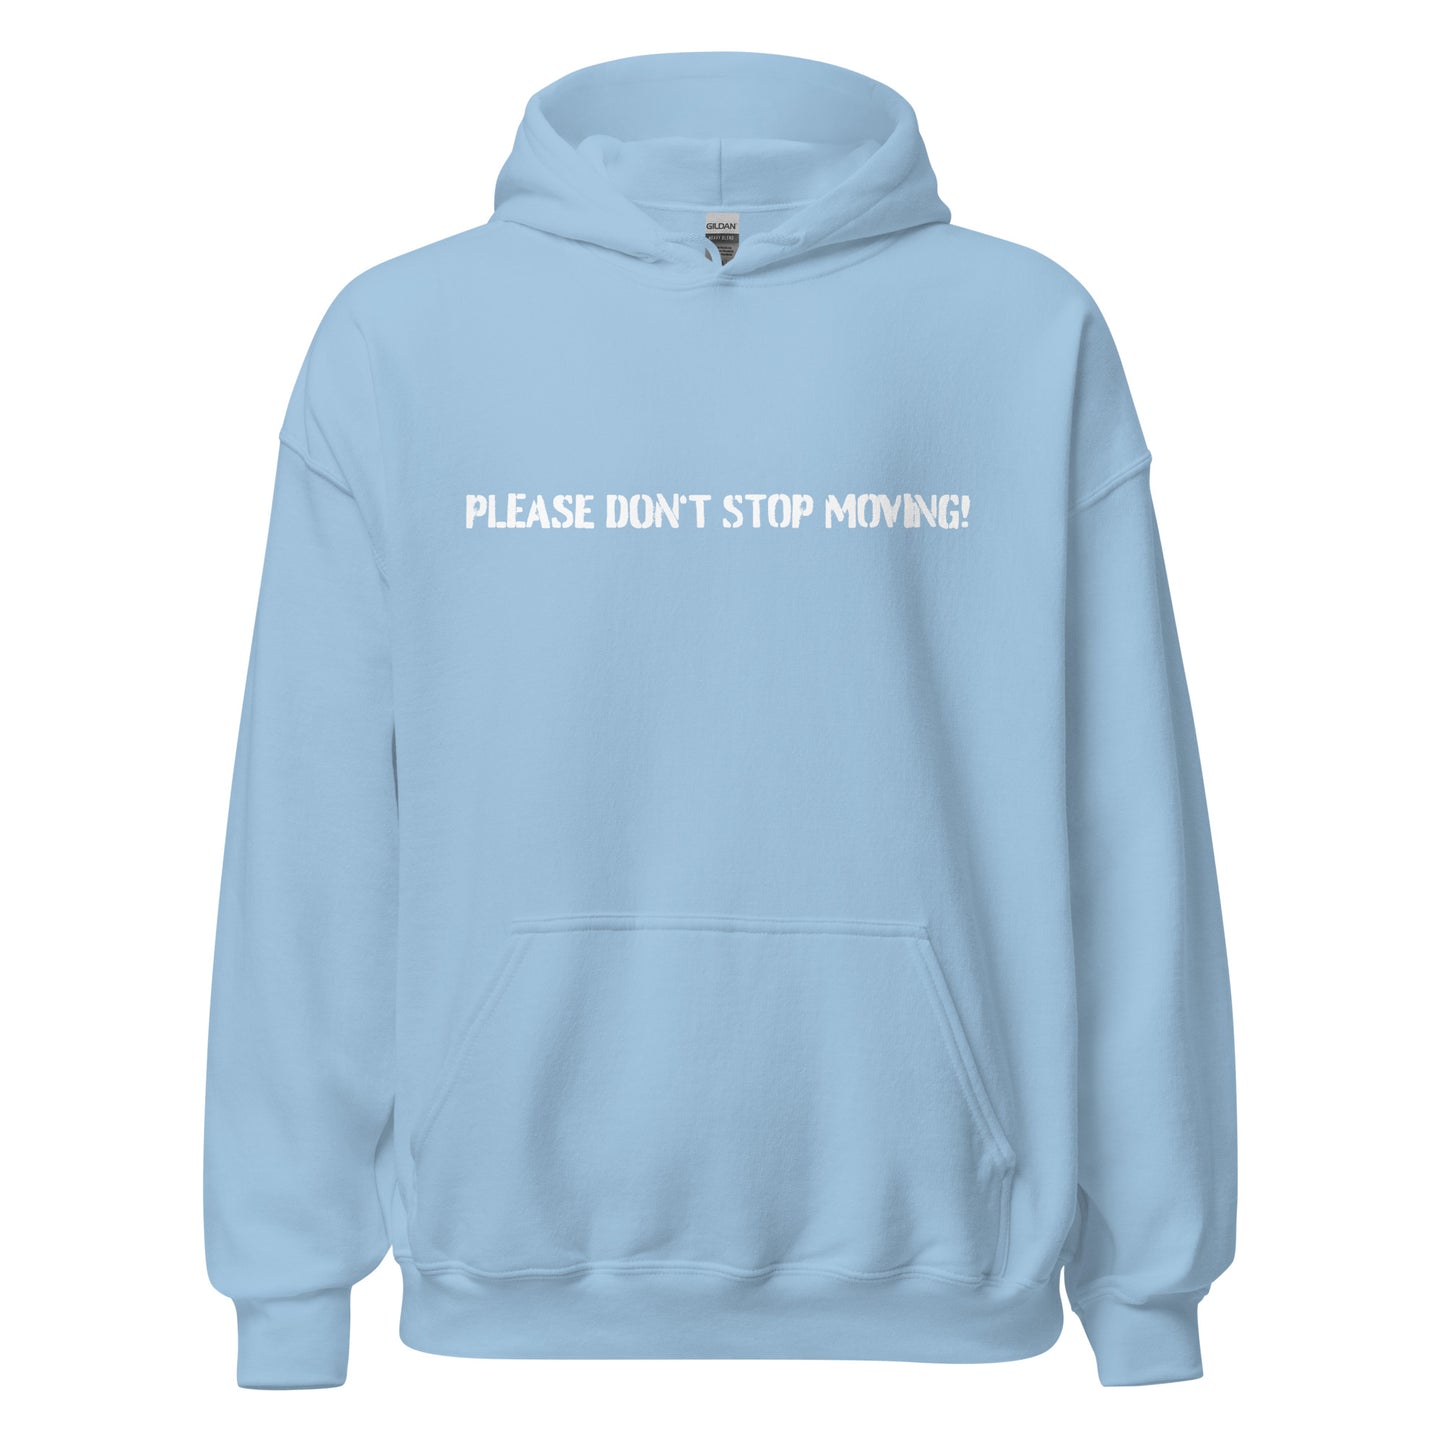 Please Don't Stop Moving! - Unisex Hoodie